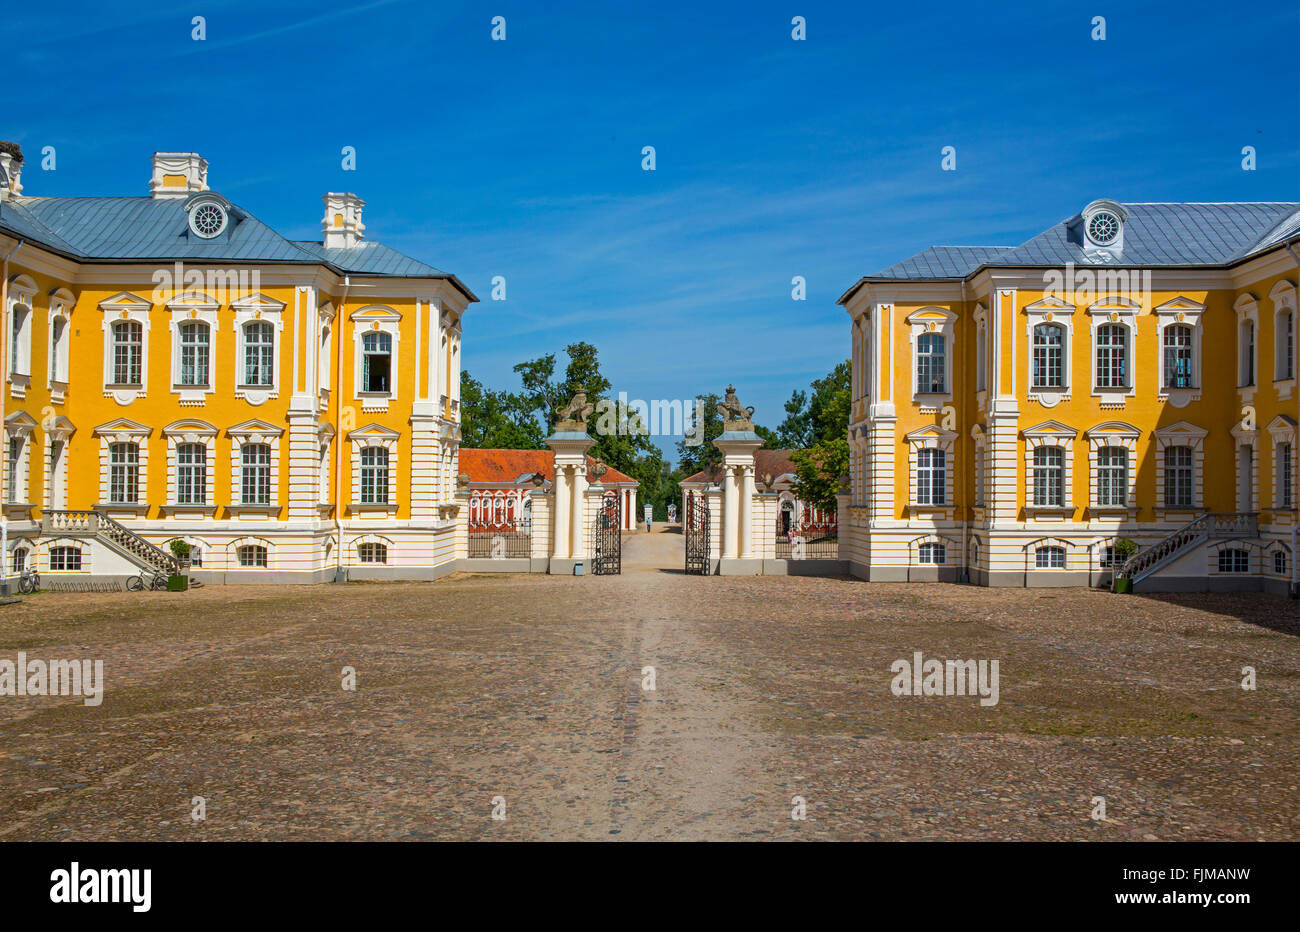 Geographie/Reisen, Lettland, Bauska, Schloss Rundale, Additional-Rights - Clearance-Info - Not-Available Stockfoto